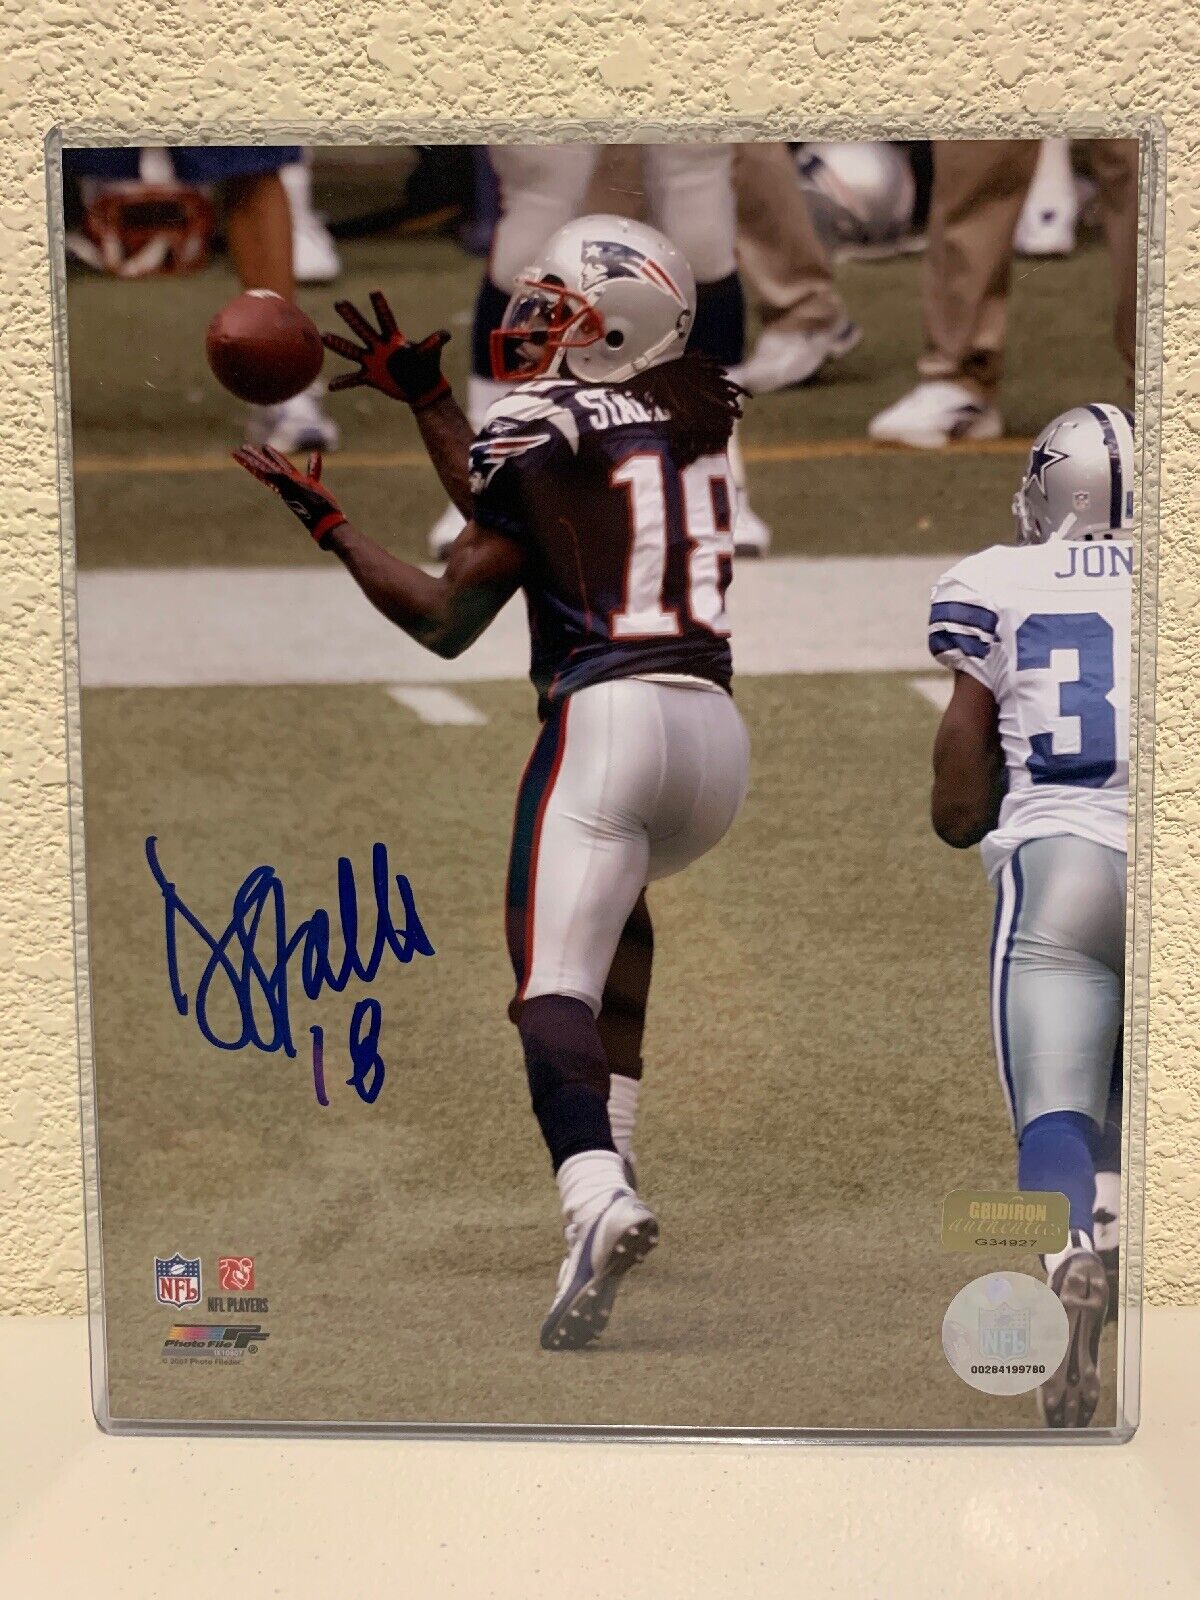 Donte Stallworth Signed New England GA Photo Patriots 8x10 New color NEW before selling